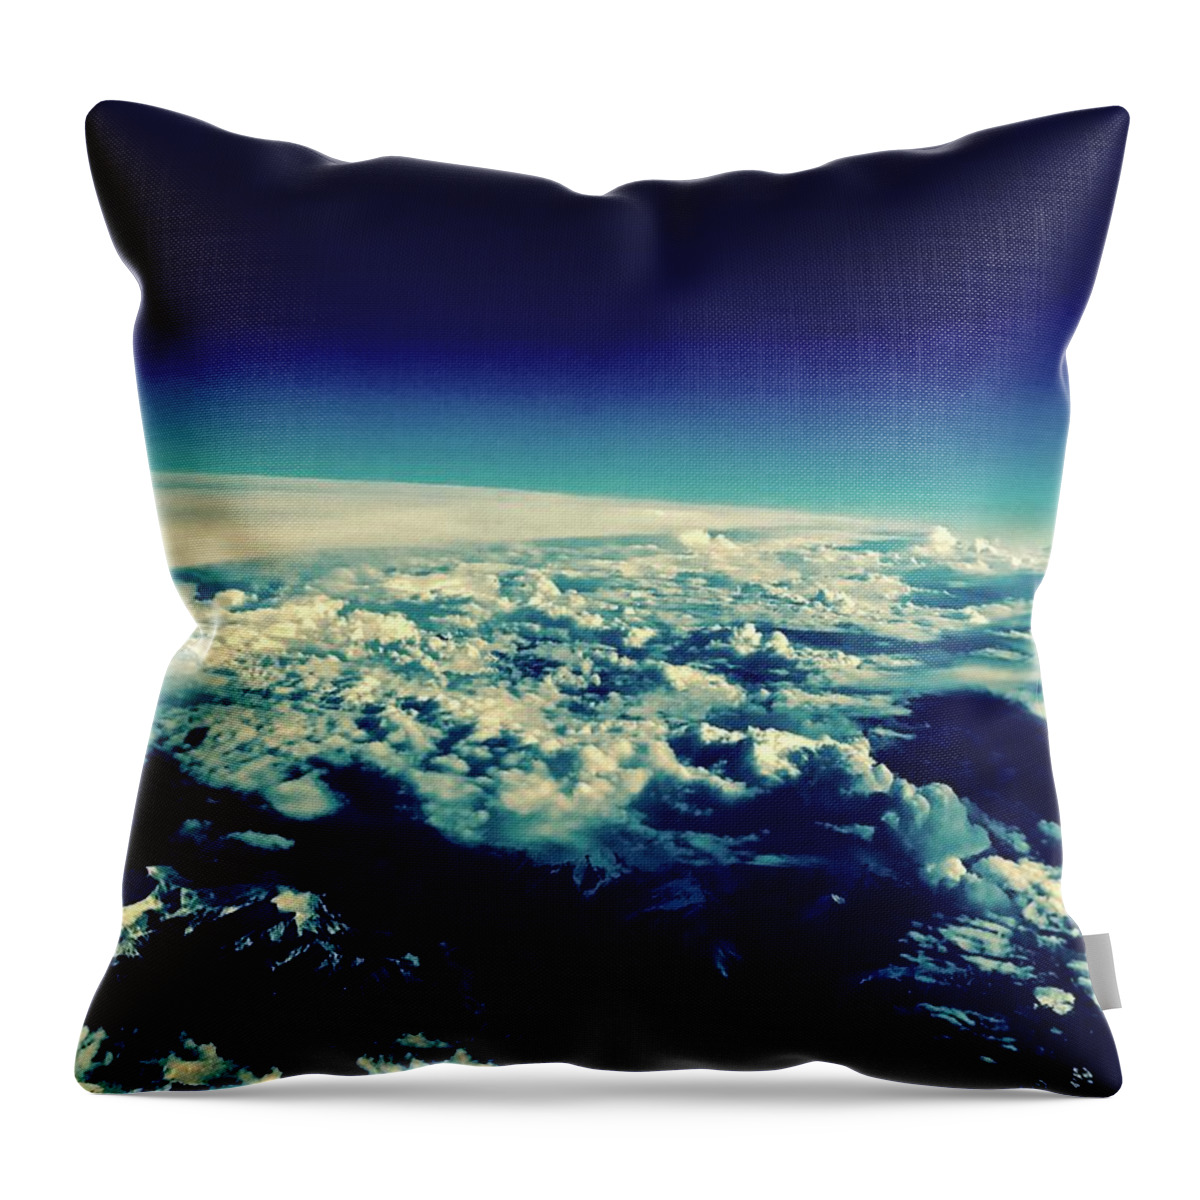  Throw Pillow featuring the photograph Flying High by Brian Sereda